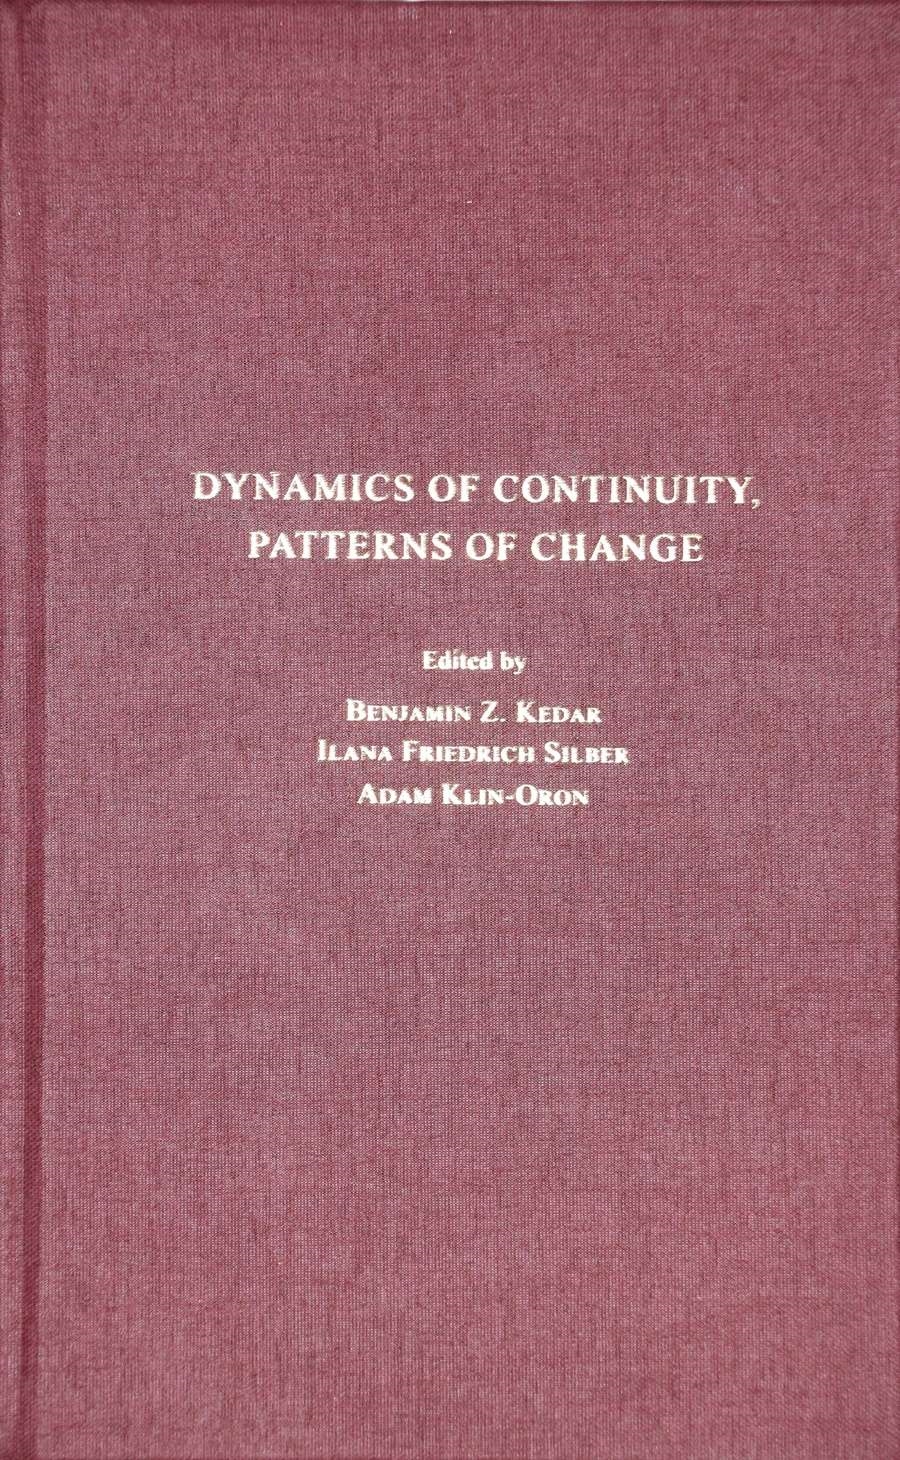 Dynamics of Continuity, Patterns of Change